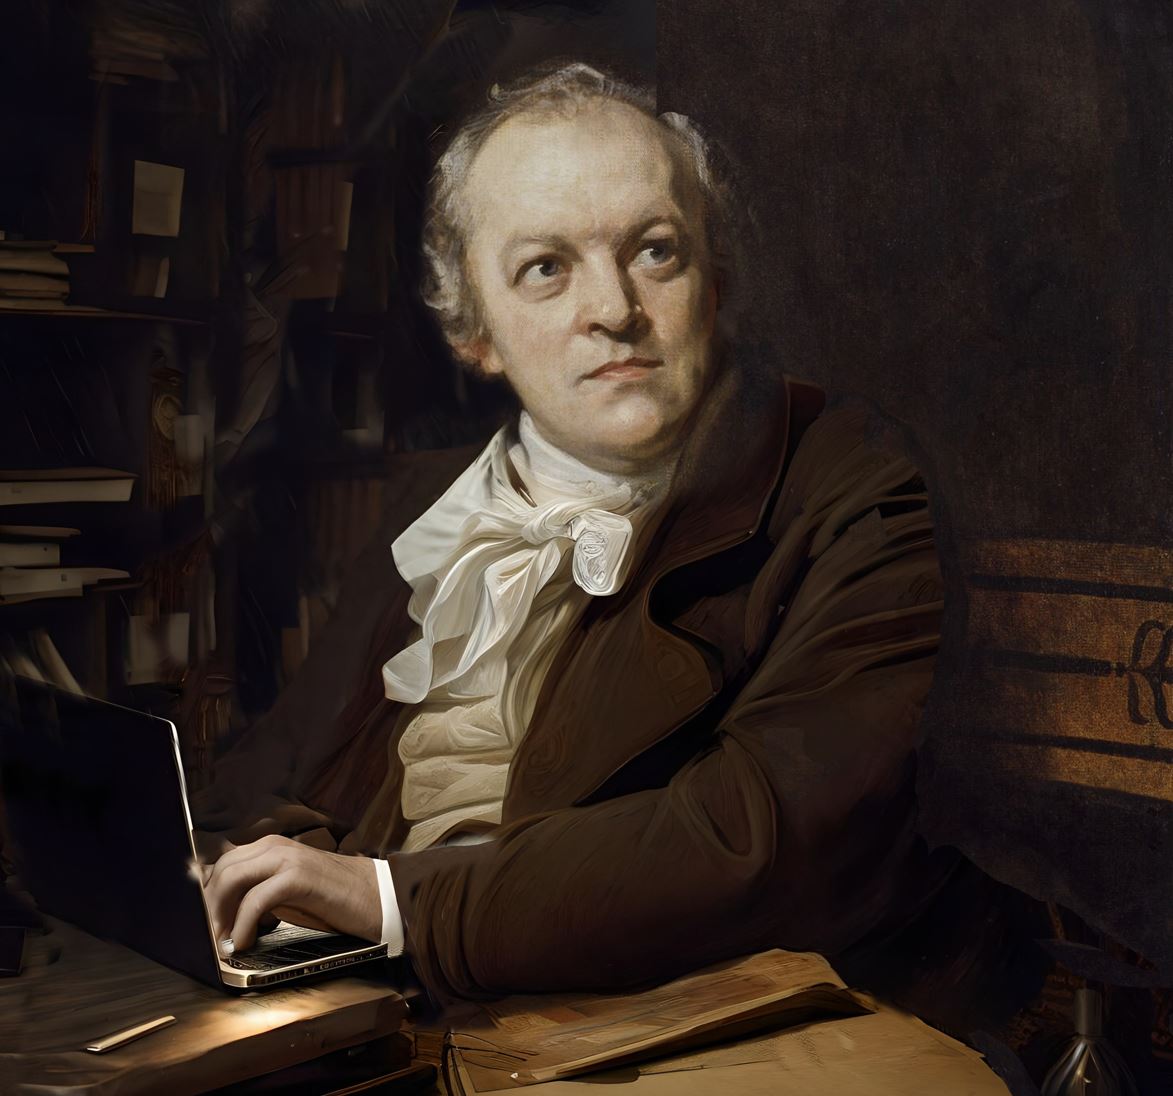 ‘William Blake and his Laptop’, by Gil Dekel and AI, from a portrait by Thomas Phillips (1807), 2023.